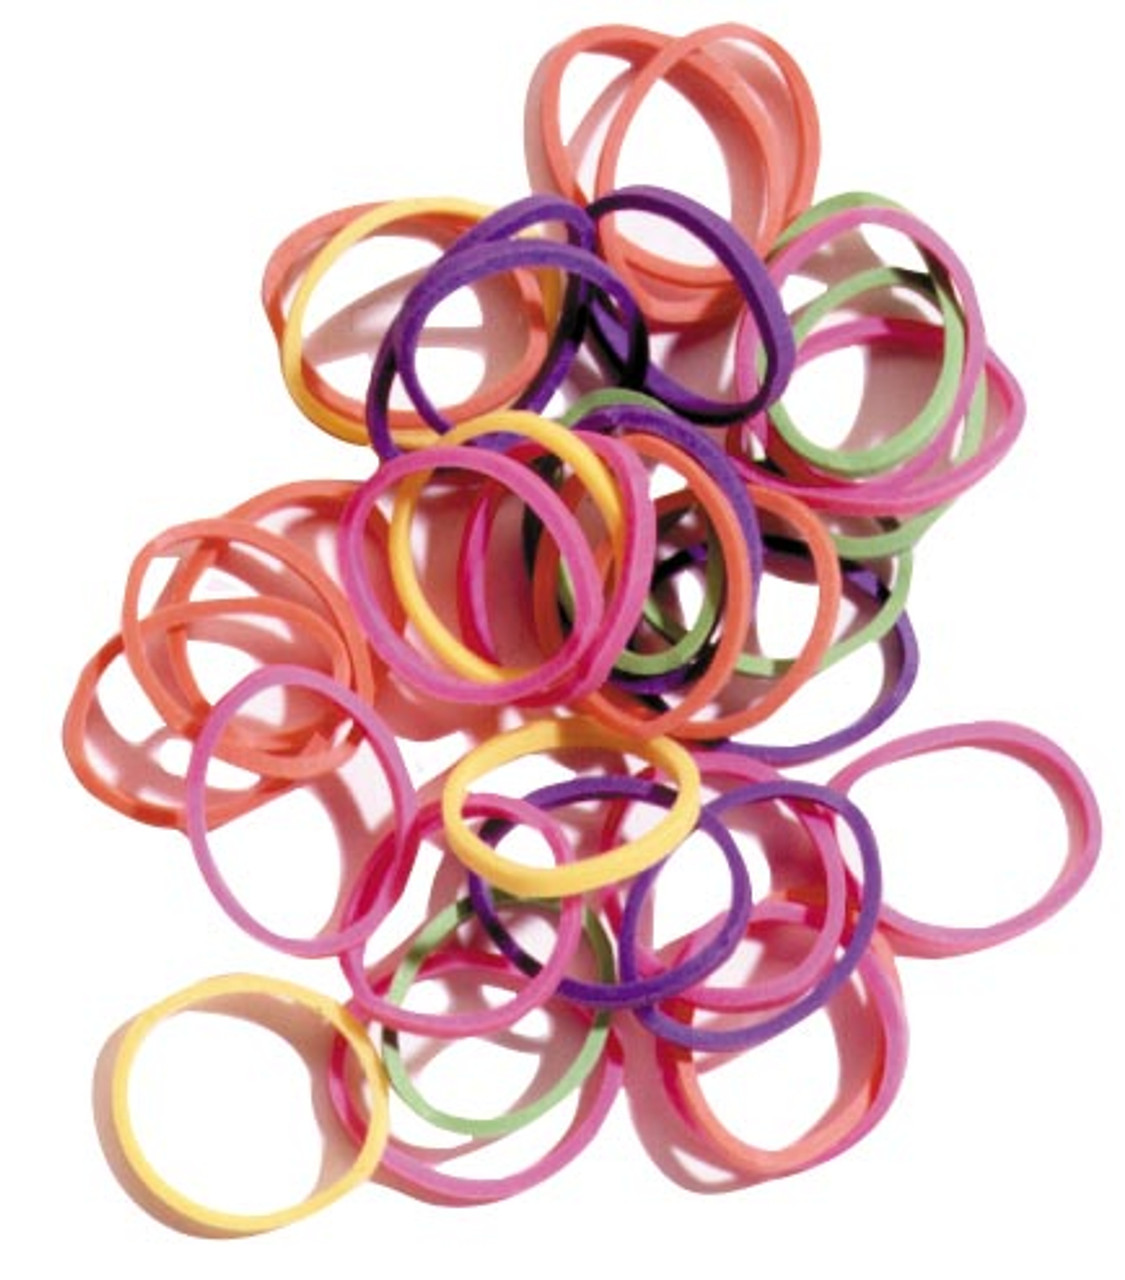 Bright Assorted Rubber Bands - Boss Beauty Supply